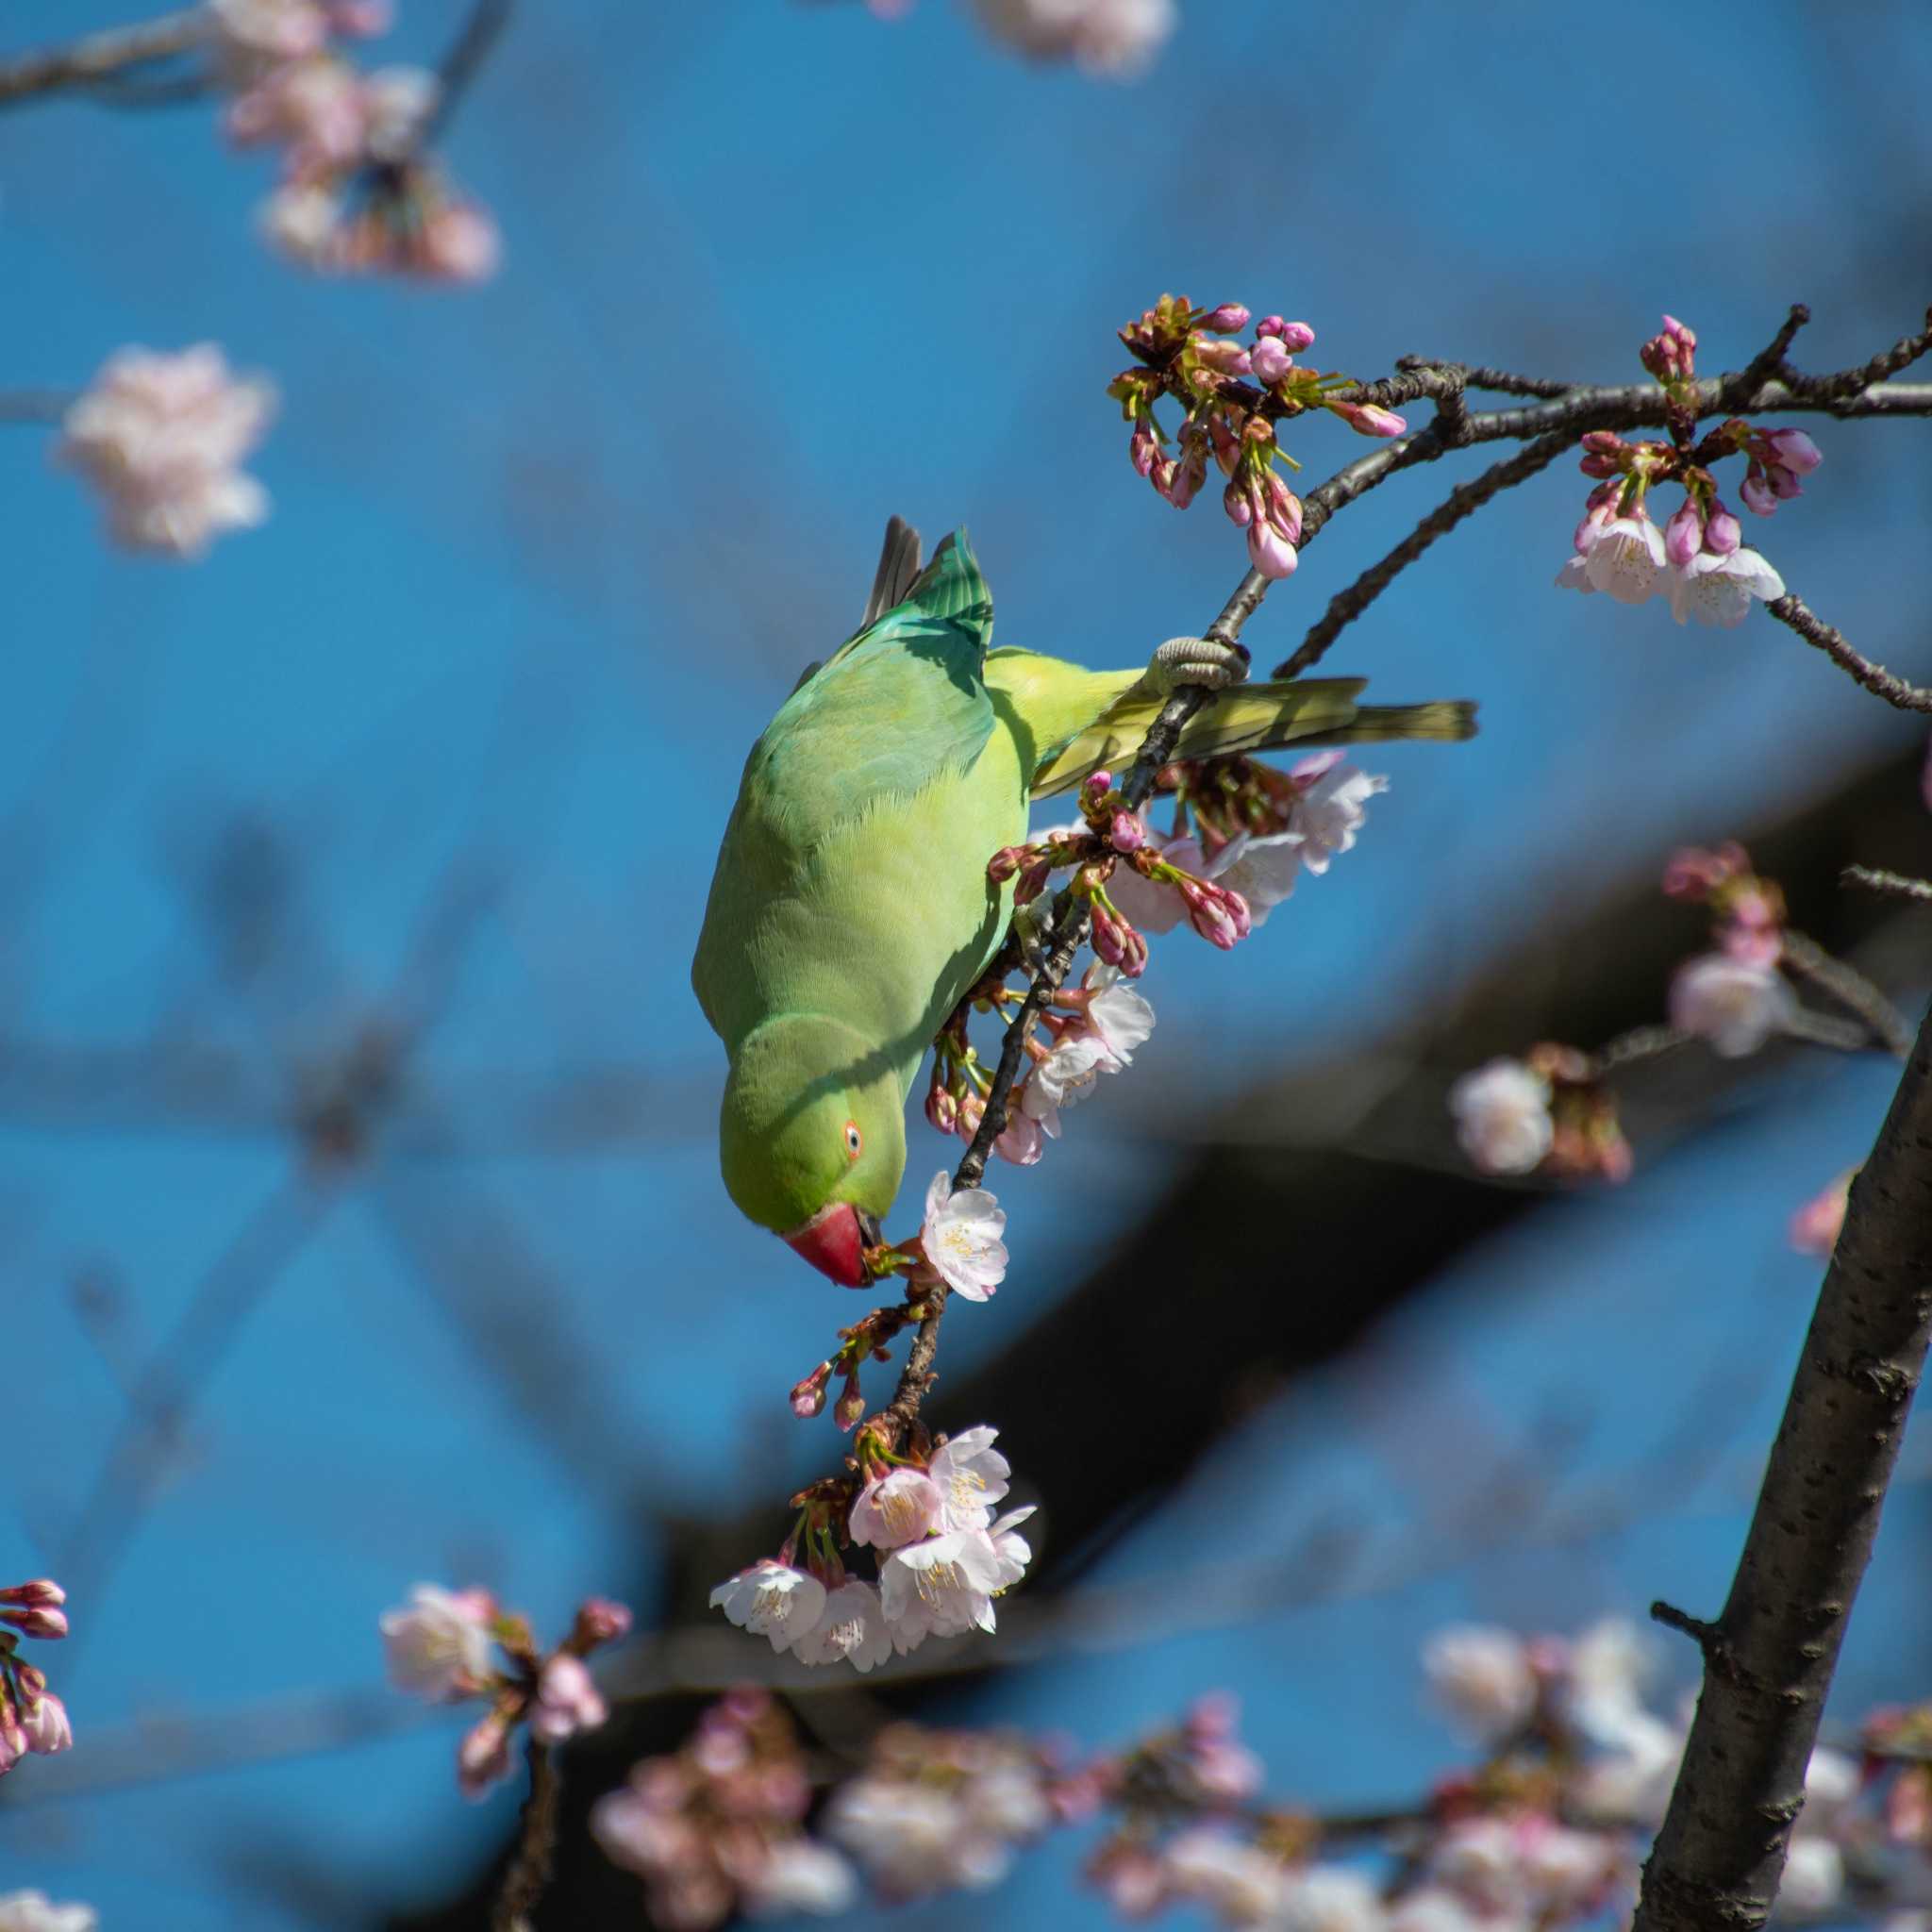 Photo of Indian Rose-necked Parakeet at 上野公園 by ぱんだまんち